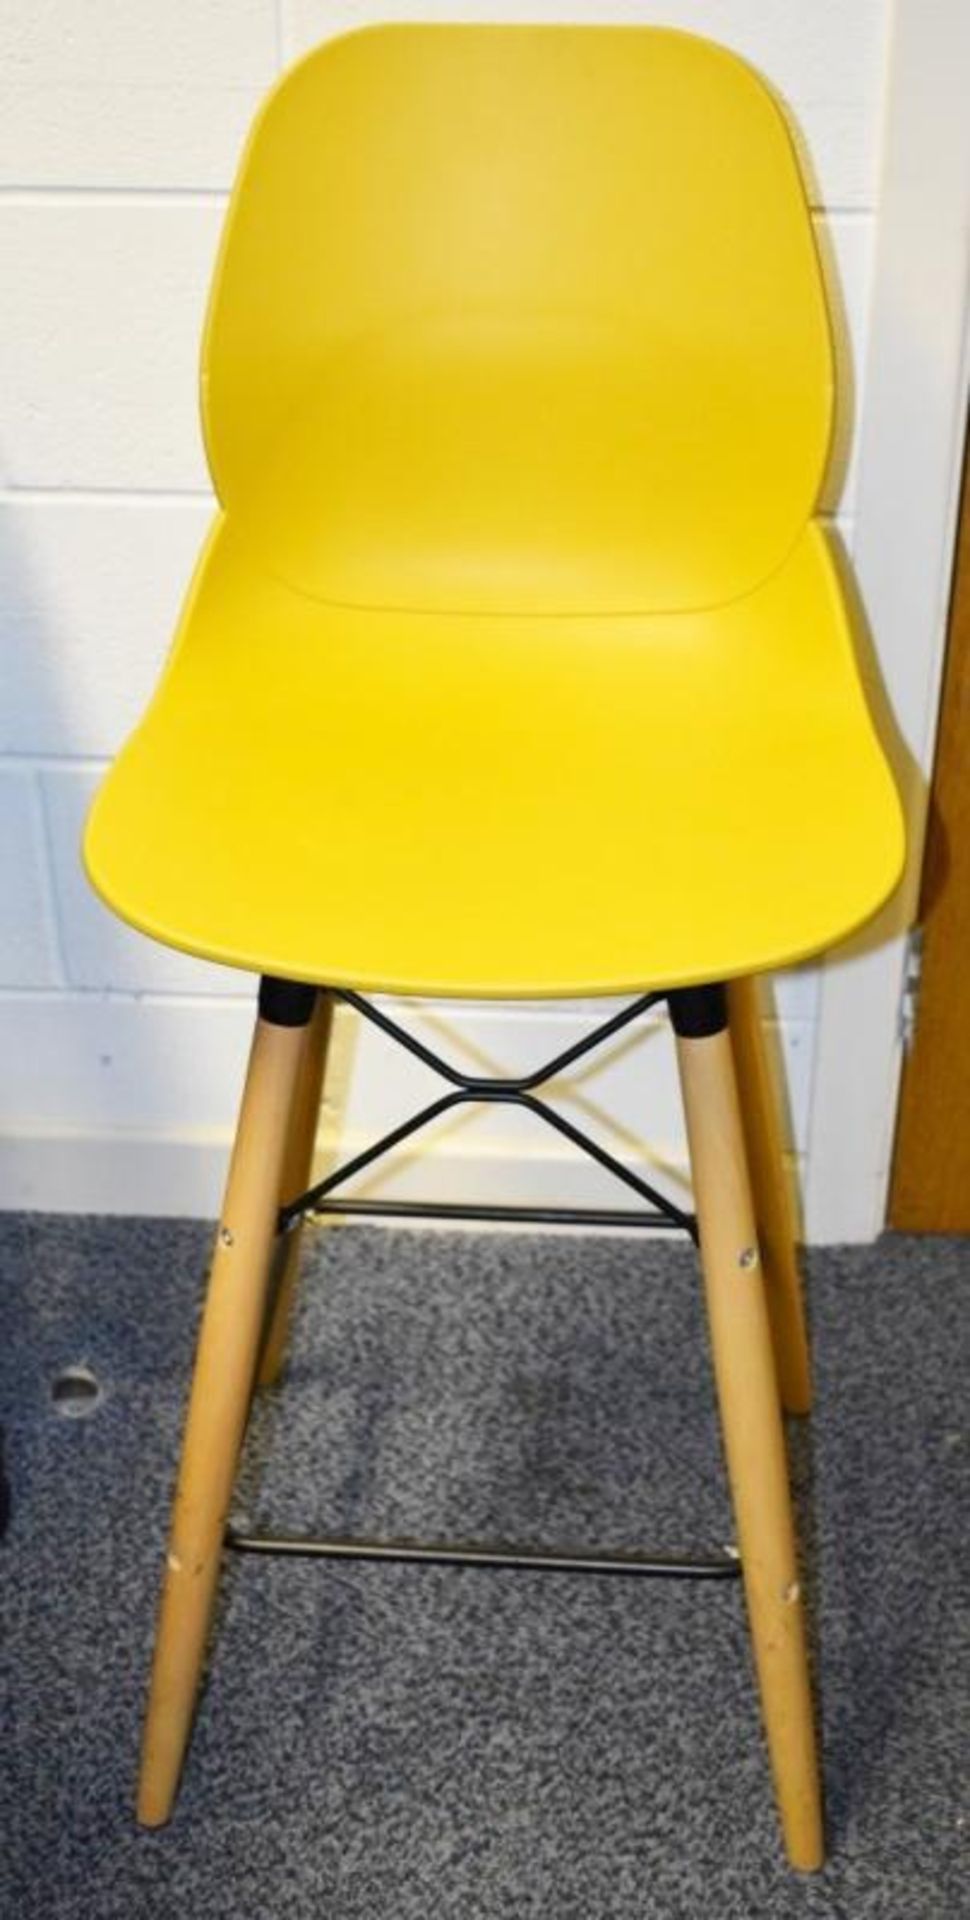 3 x GRESHAM Eames-Style Bar Stools - 3 Colours - Used, Please See Condition Report - CL437 - Locatio - Image 2 of 7